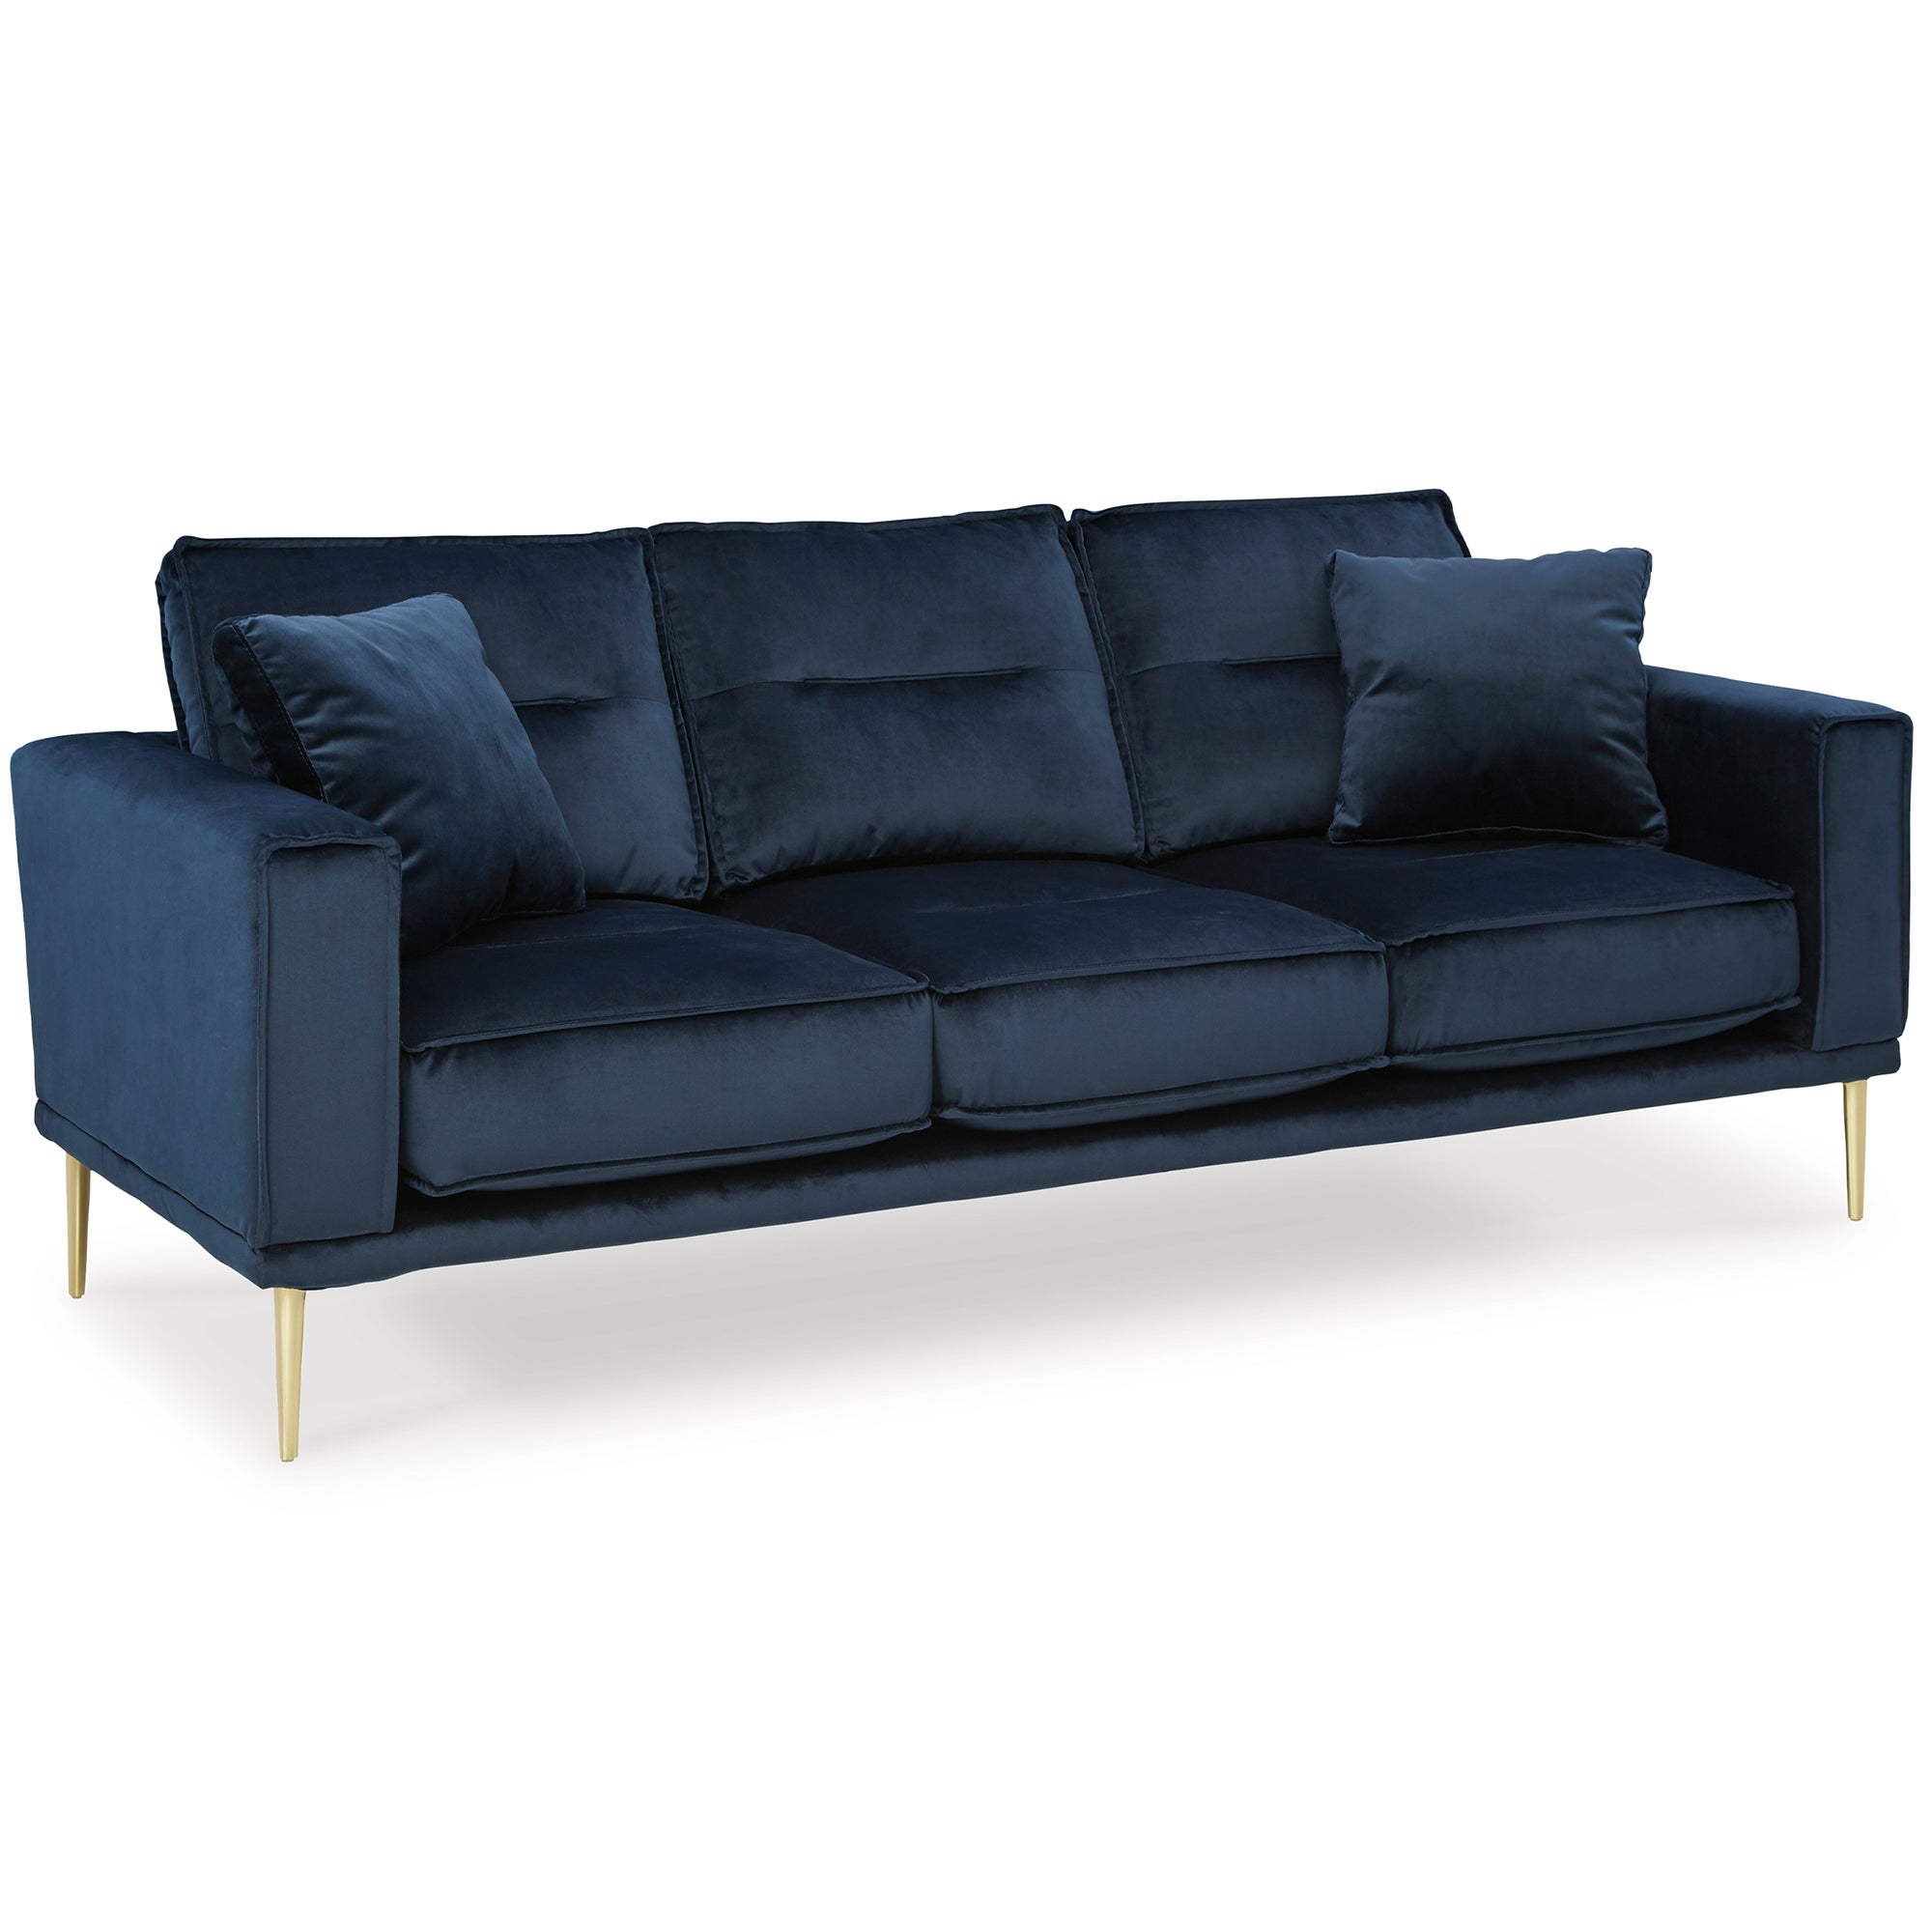 Macleary Sofa and Loveseat